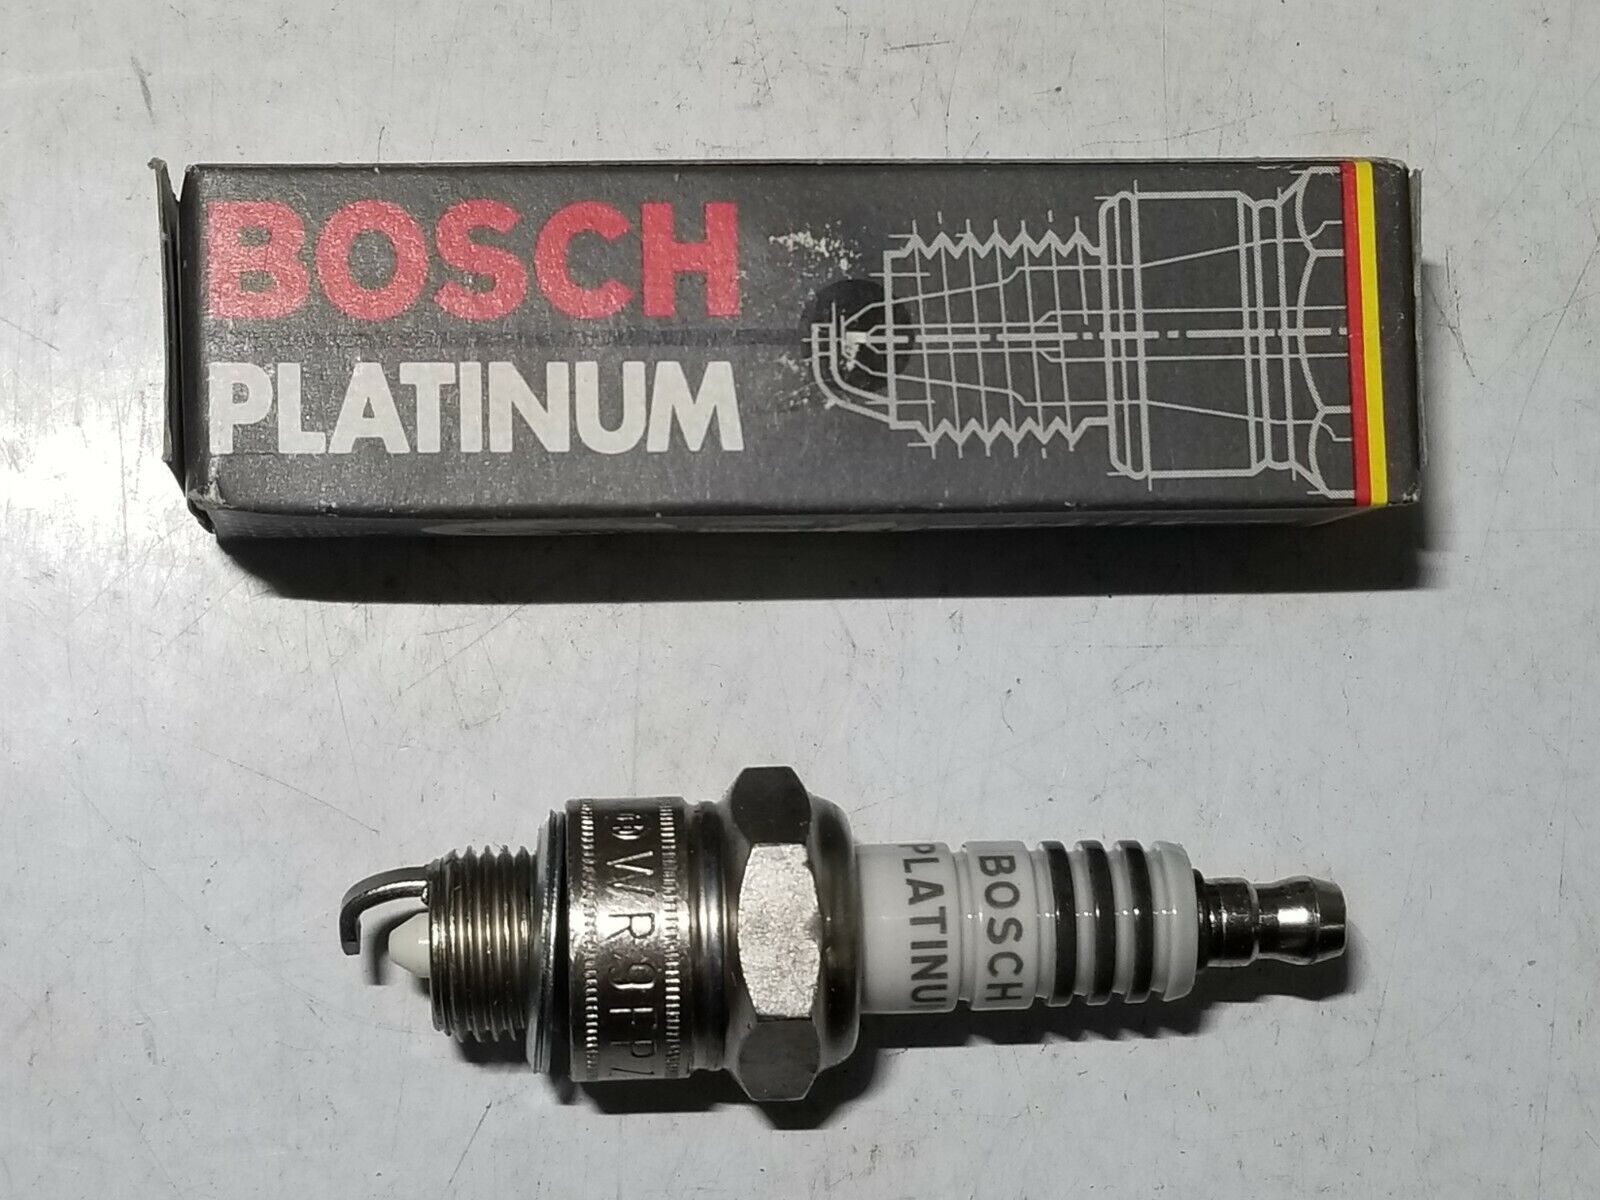 QTY-1) New Old Stock Spark Plugs Bosch Platinum #4223, WR9FPZ, Germany